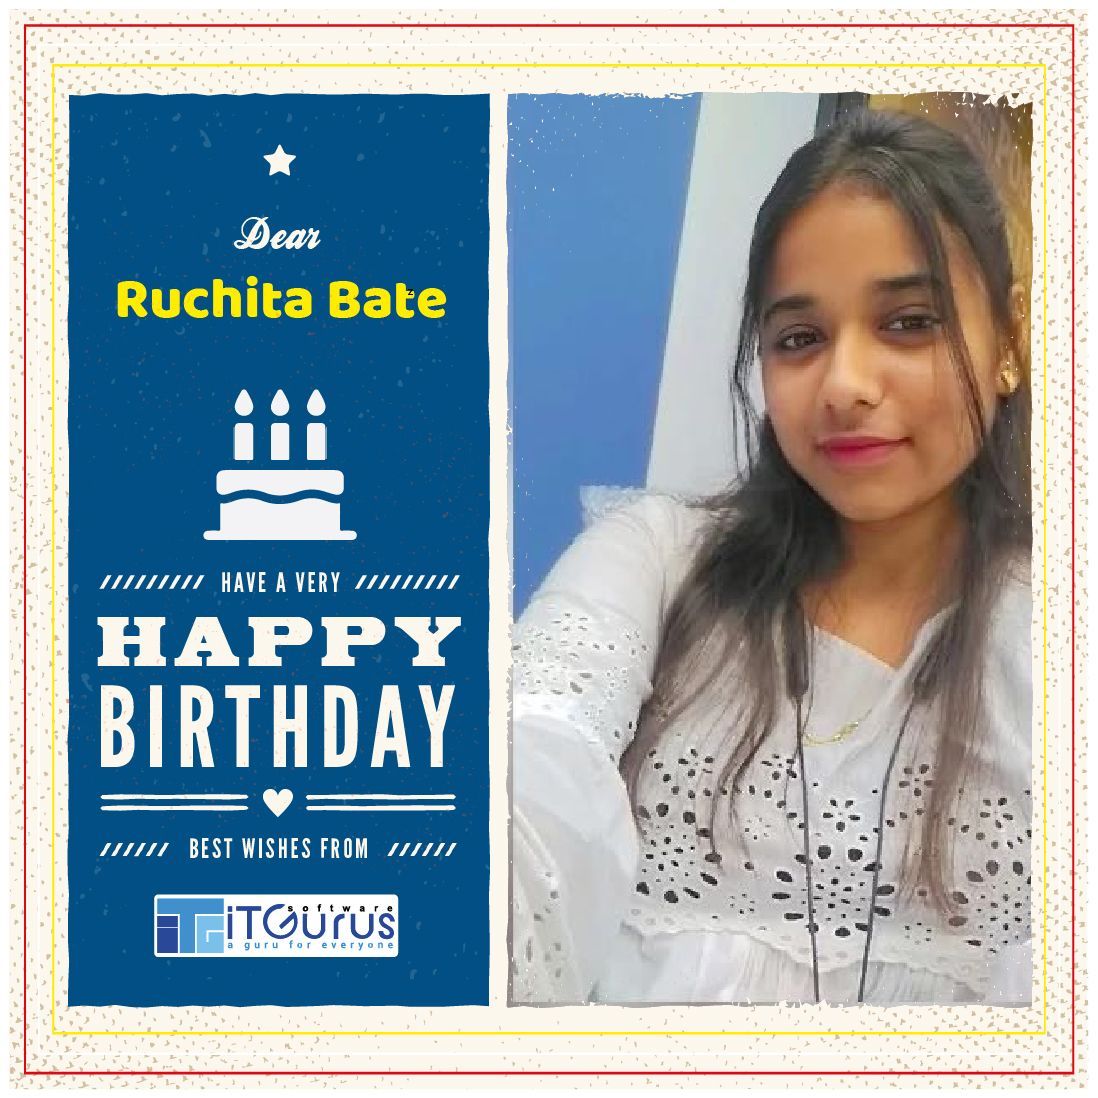 Wishing you a day filled with laughter and love. 
Happy Birthday to @ Ruchita Bate from Team iT Gurus Software!

#birthday #birthdaycake #birthdayparty #birthdaycakes #birthdayballoons #birthdaydecoration #happybd #happybday #birthdayinoffice